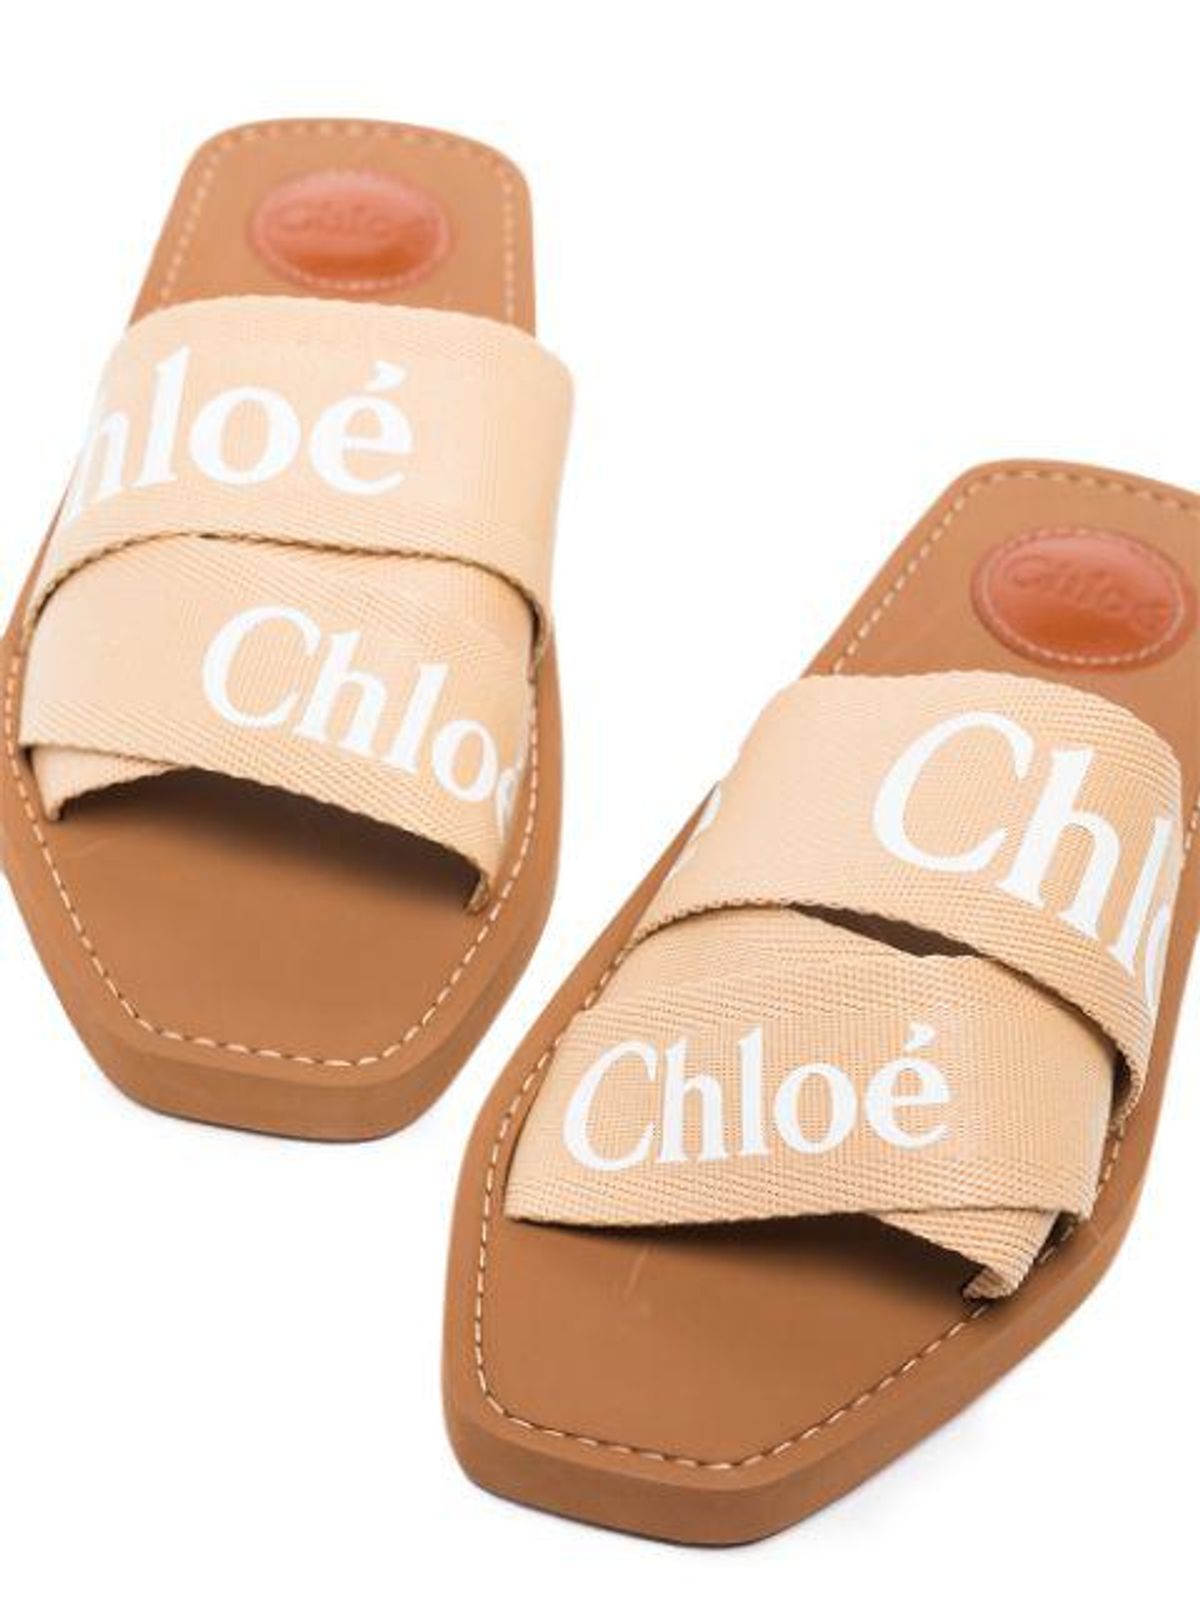 Woody Logo Strap Sandals in Soft Tan